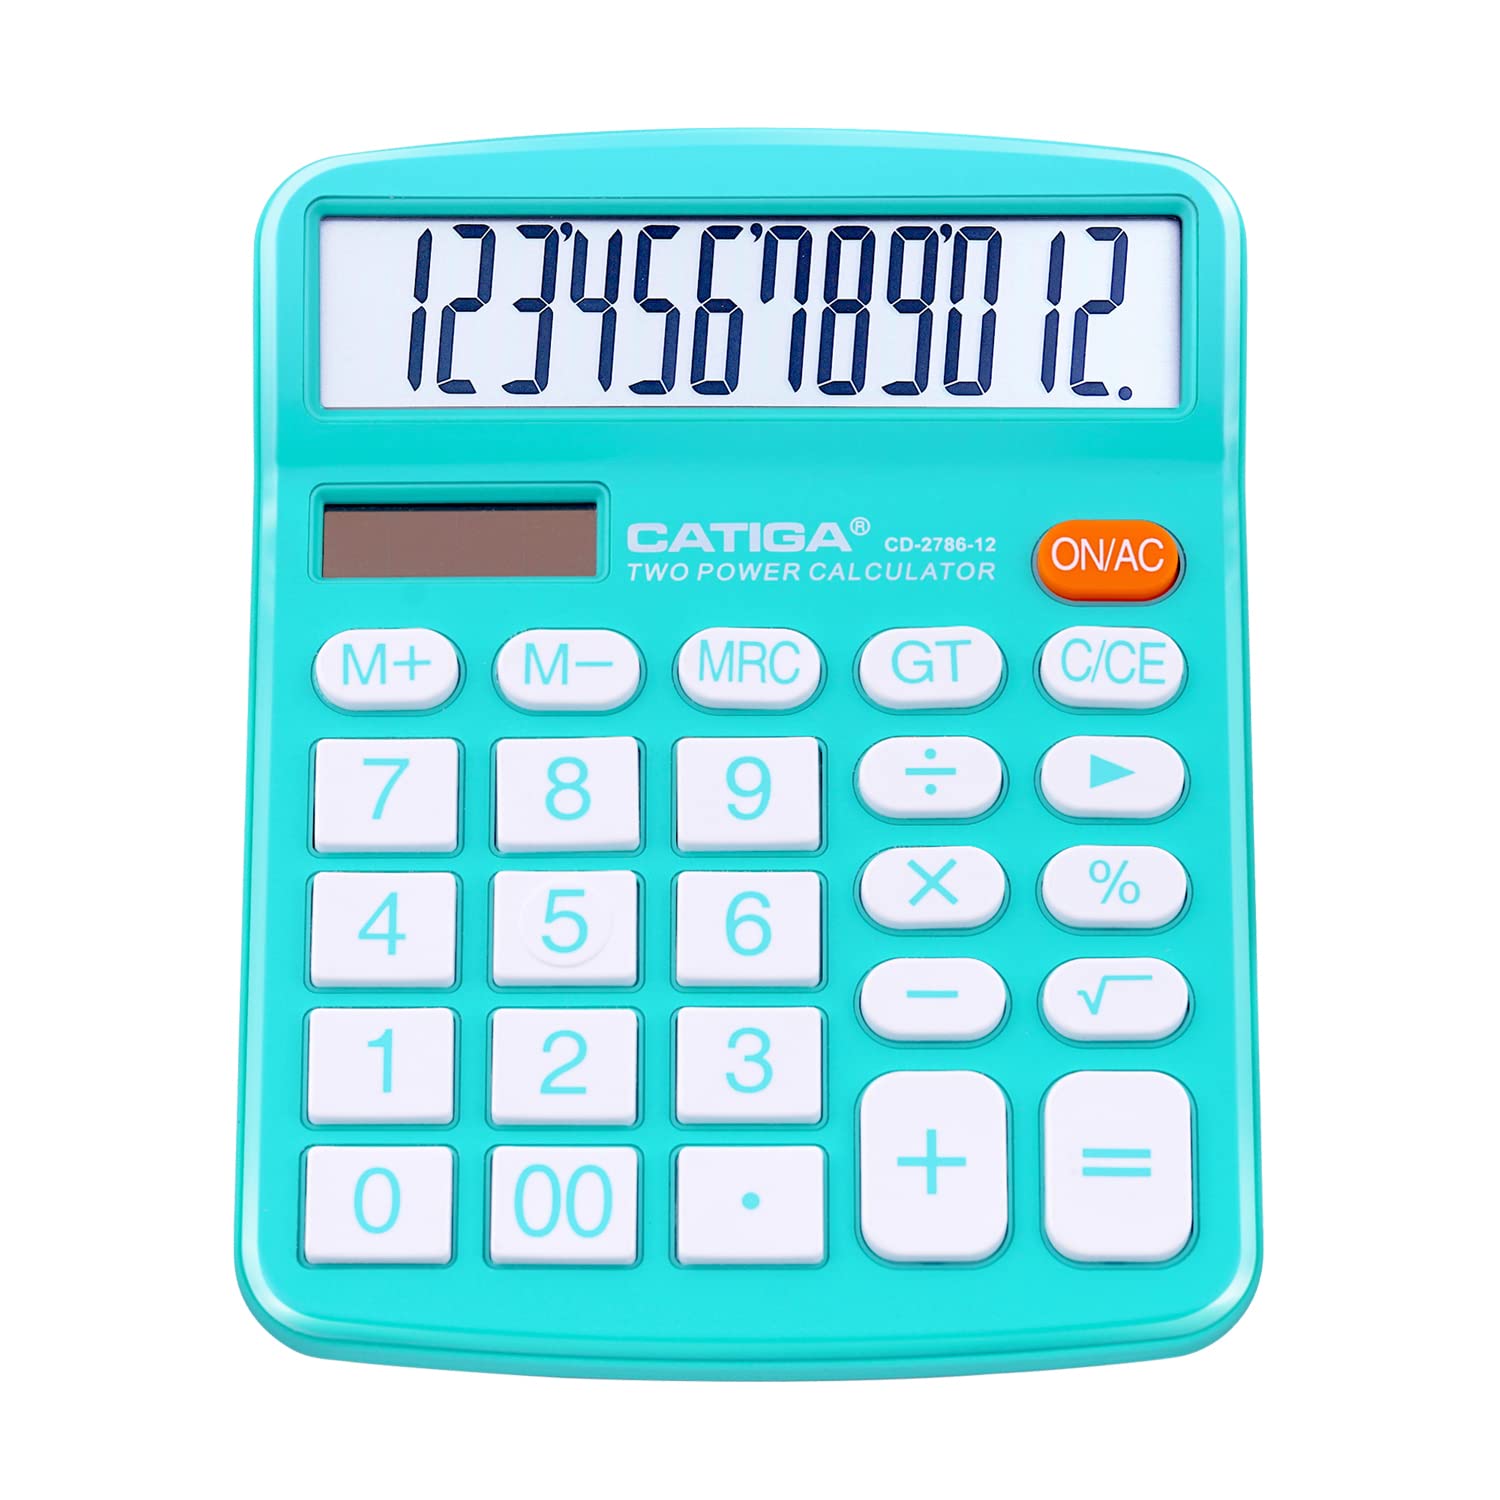 Desktop Calculator 12 Digit with Large LCD Display and Sensitive Button, Solar and Battery Dual Power, Standard Function for Office, Home, School, CD-2786 (Light Blue)